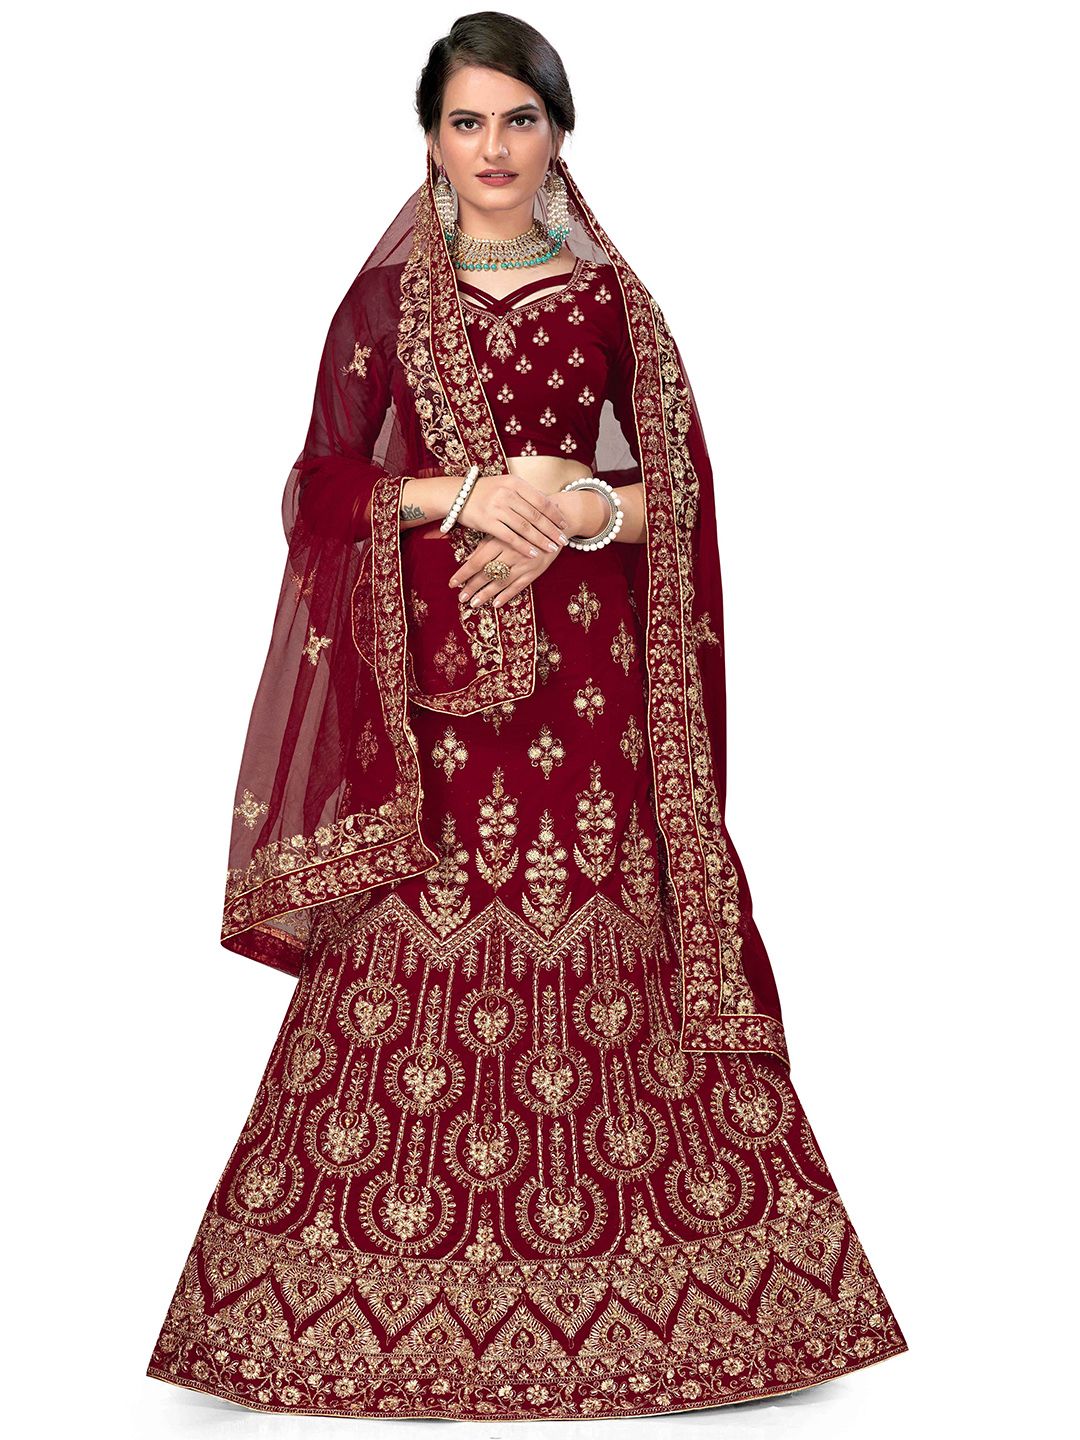 MANVAA Floral Embroidered Semi-Stitched Lehenga & Unstitched Blouse With Dupatta Price in India